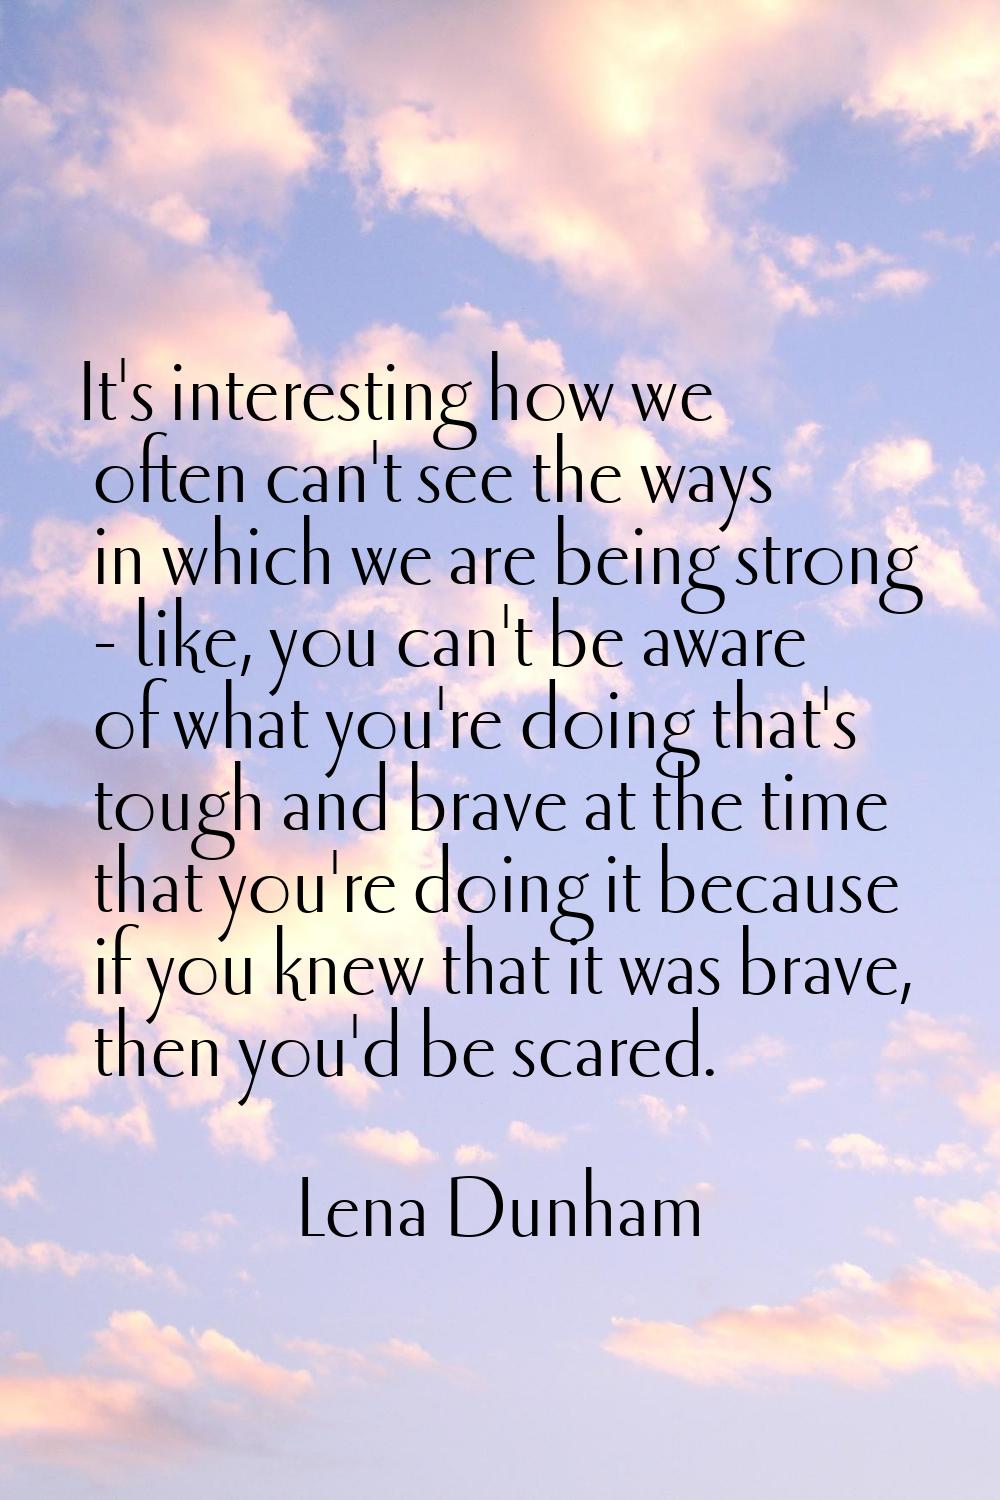 It's interesting how we often can't see the ways in which we are being strong - like, you can't be 